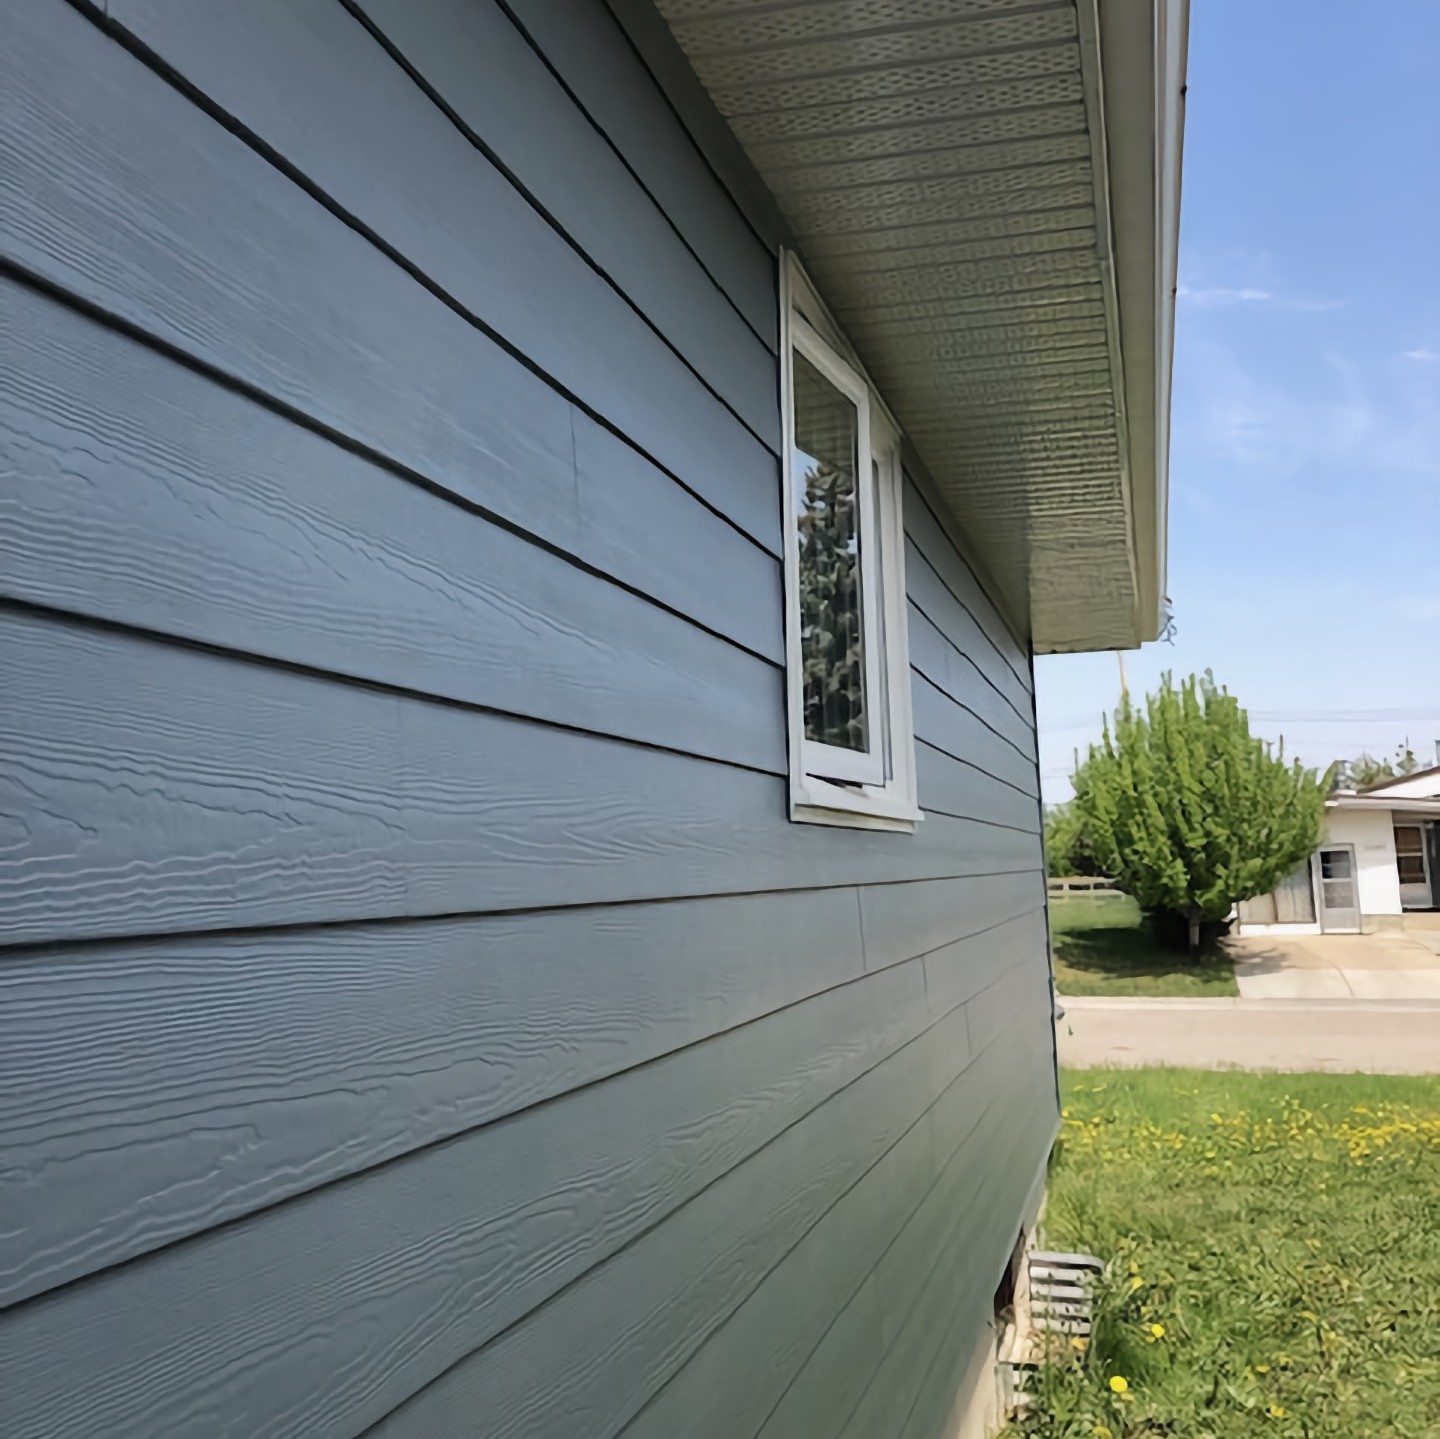 hardie board wall unsuitable for clothesline installation